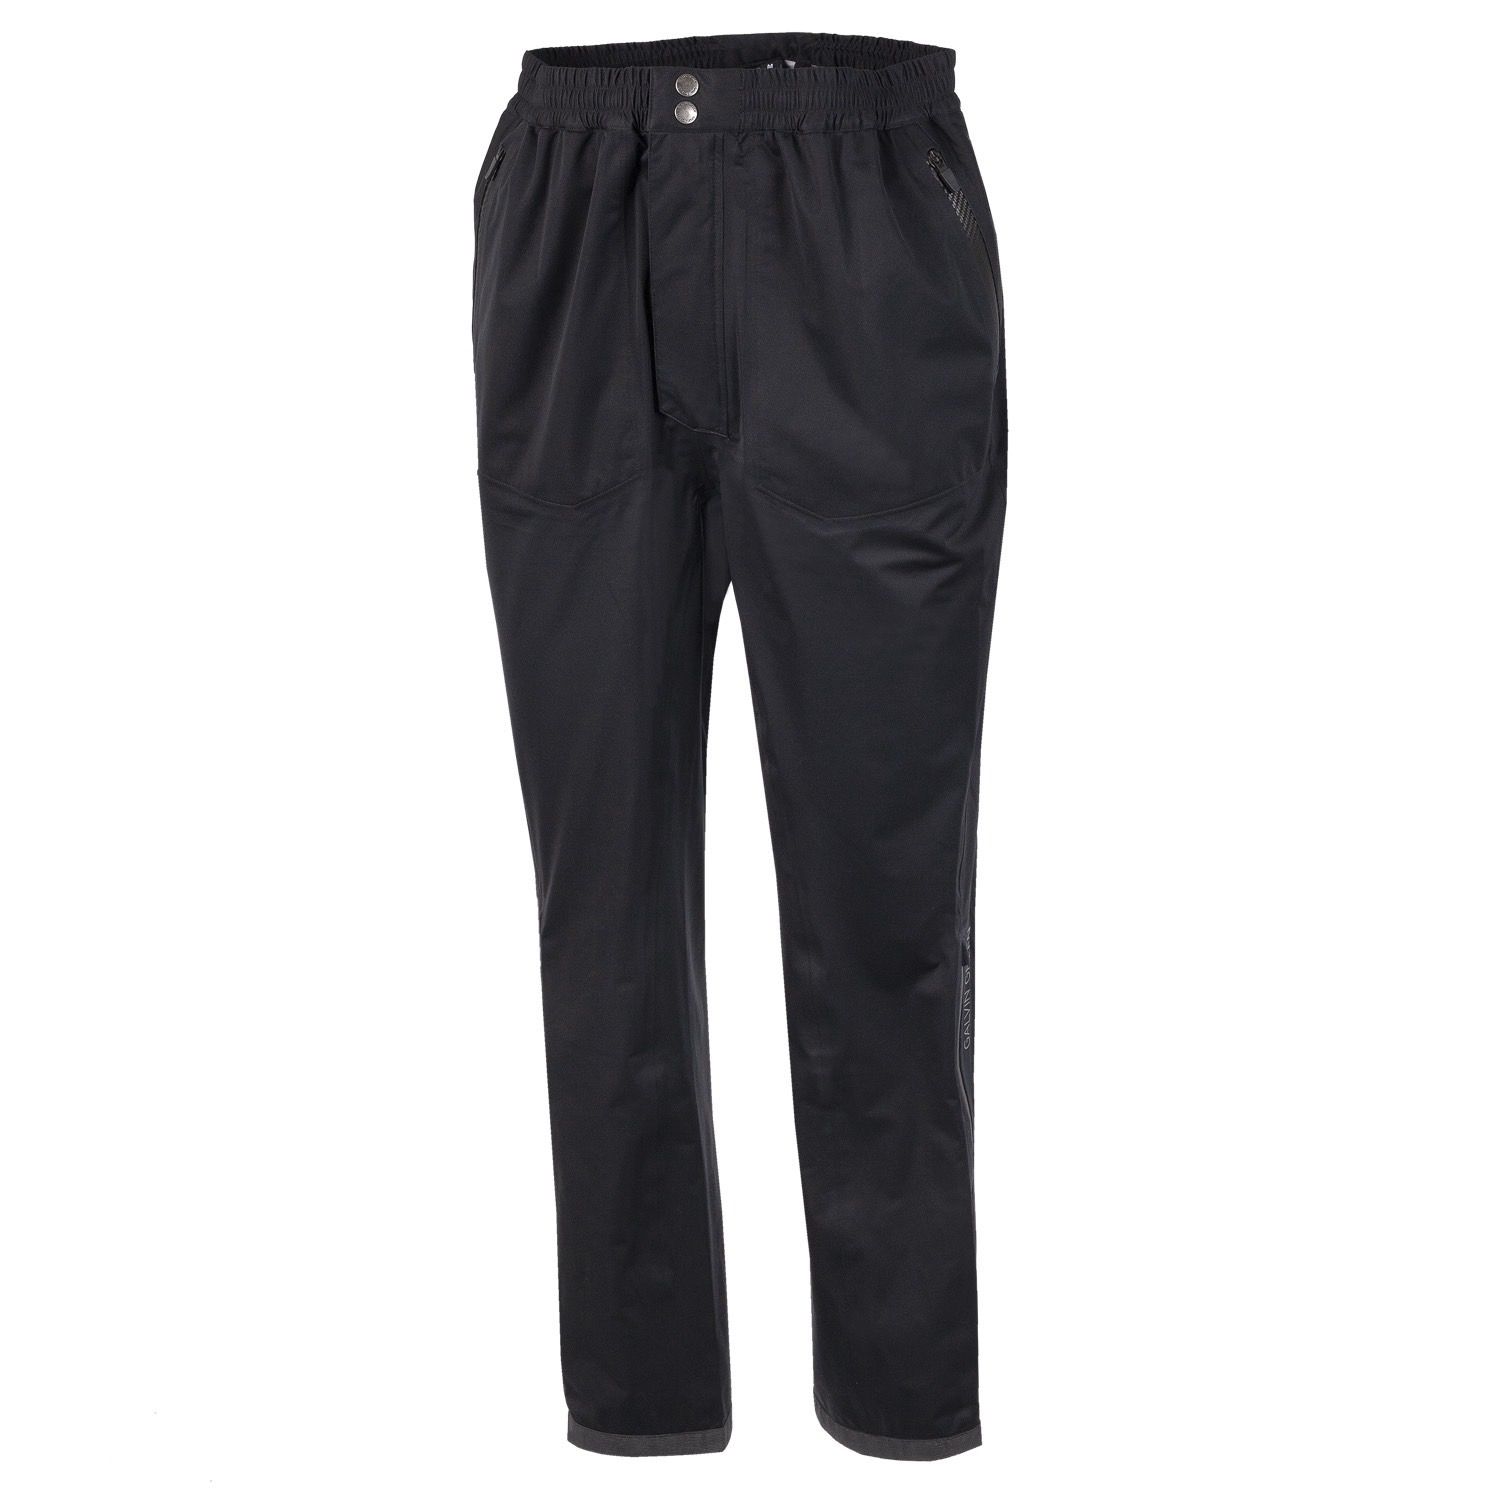 Image of Galvin Green Alpha Gore-Tex C-Knit Waterproof Golf Trousers